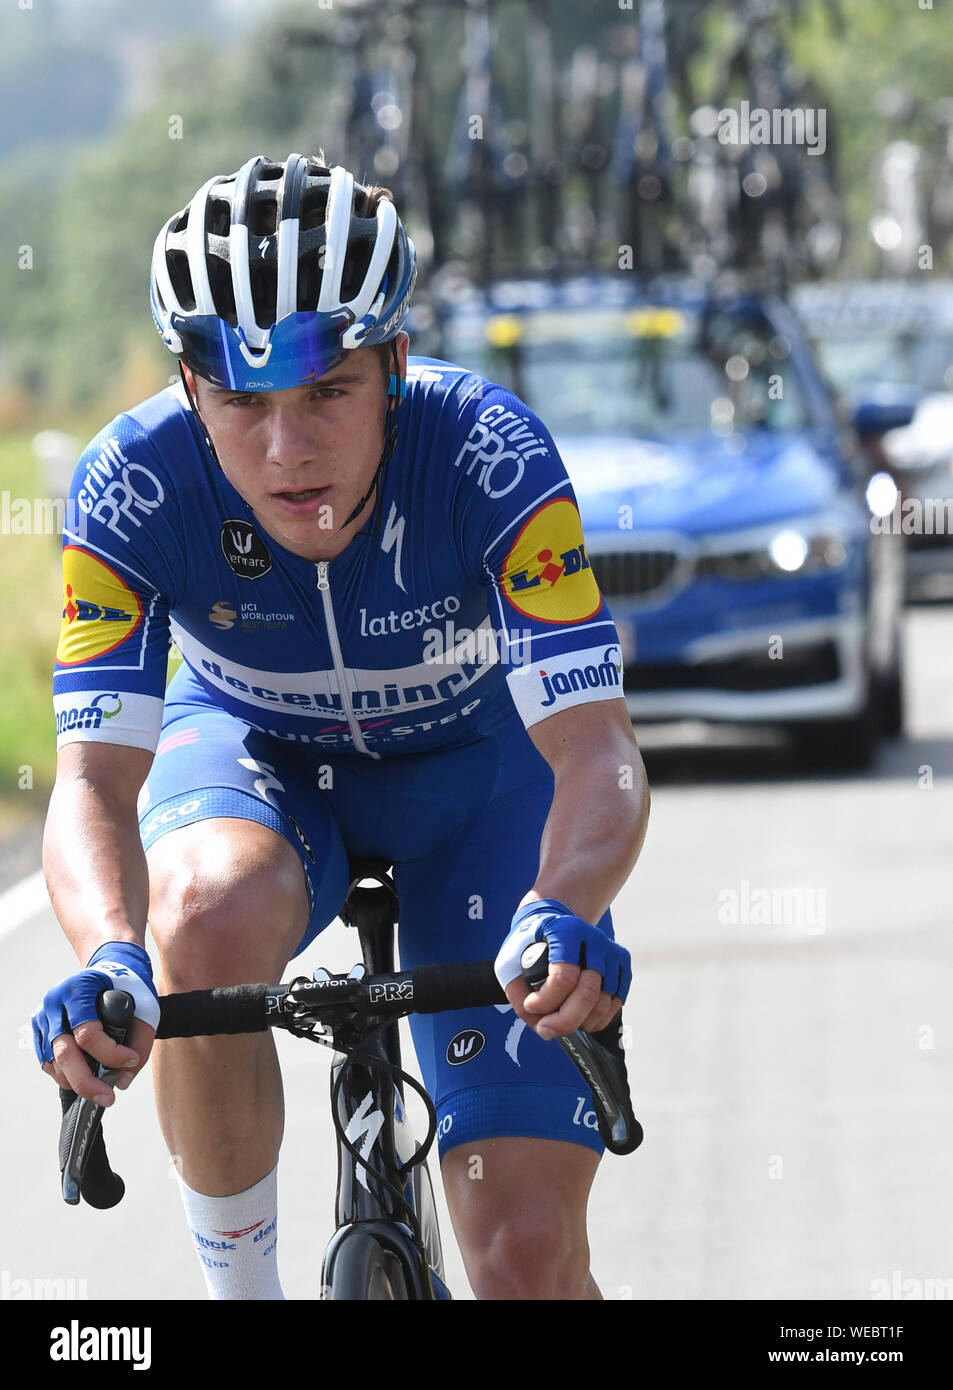 Marburg, Germany. 30th Aug, 2019. Cycling: UCI Europaserie, Germany Tour, 2nd stage from Marburg to Göttingen (202, 00 km). The Belgian Remco Evenepoel from Team Quick-Step is the leader on the track. Credit: dpa picture alliance/Alamy Live News Stock Photo